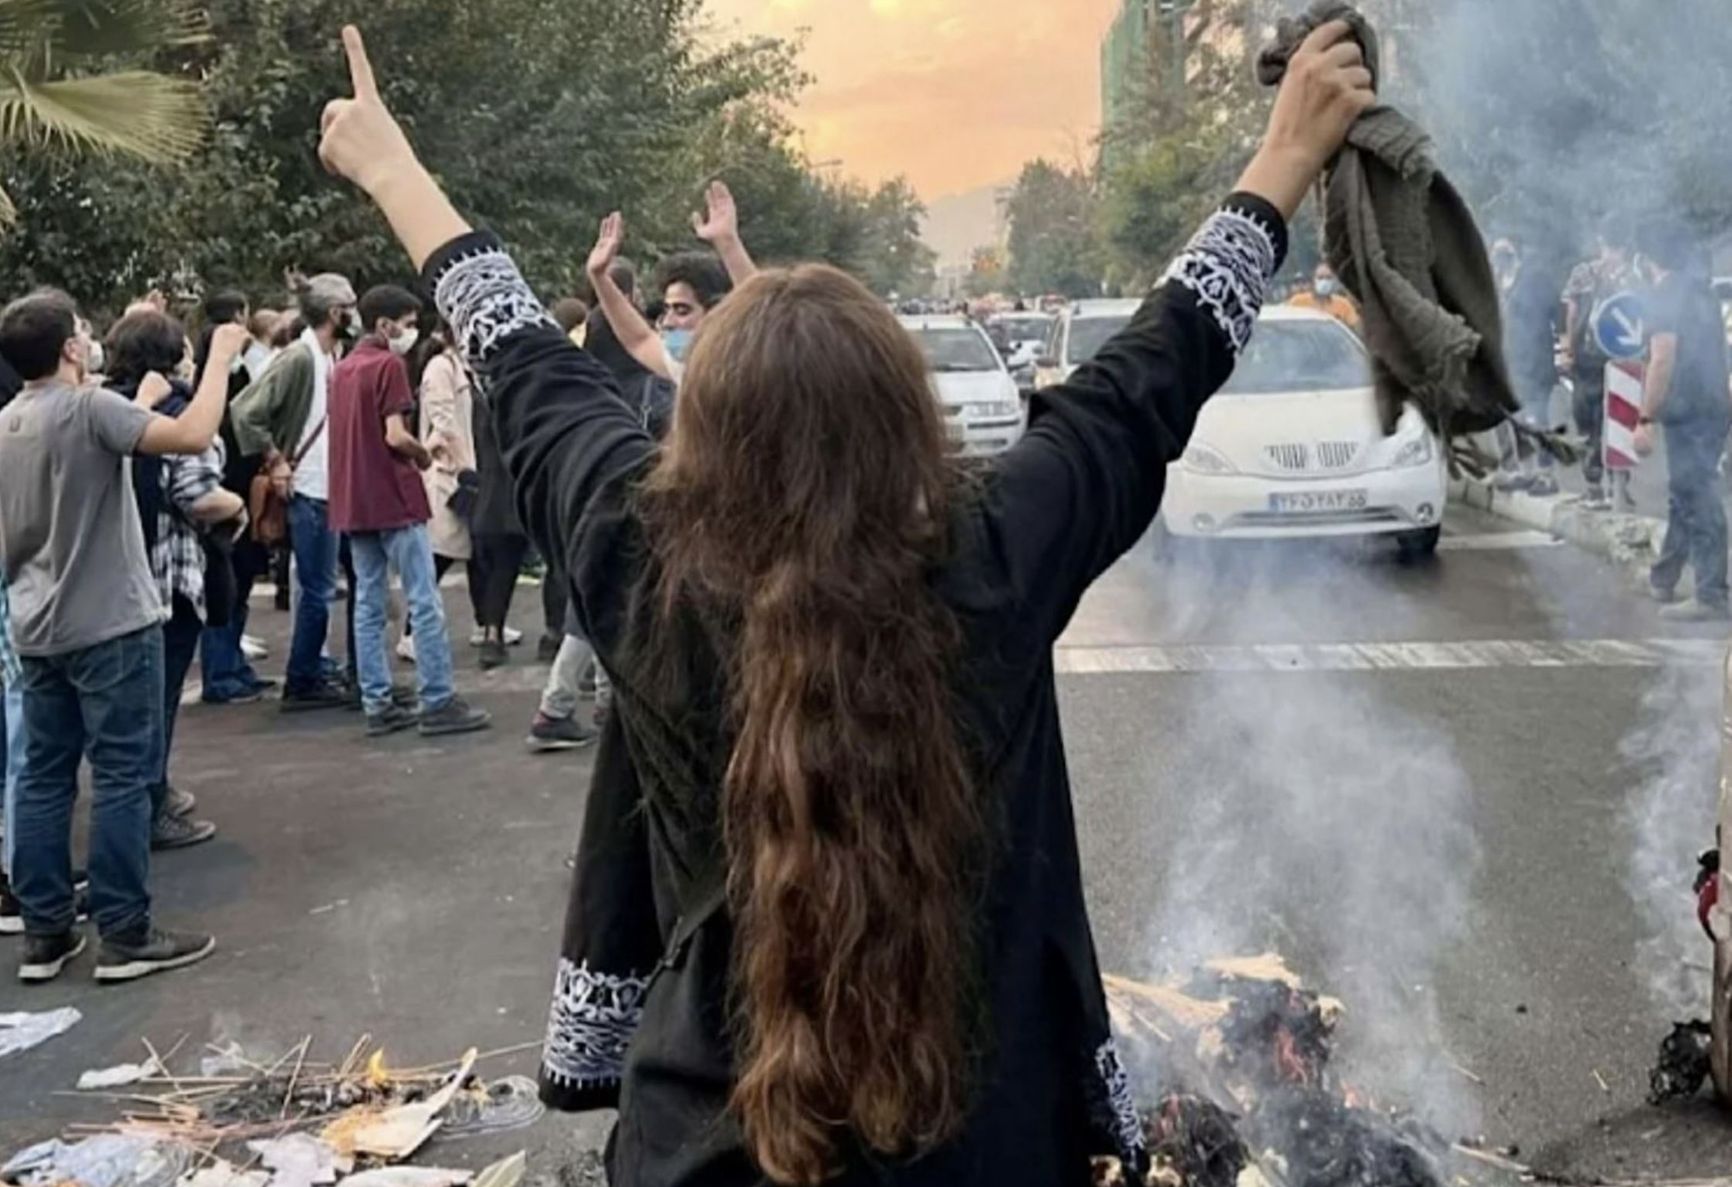 Protest in Tehran after the death of Mahsa Amini  twitter